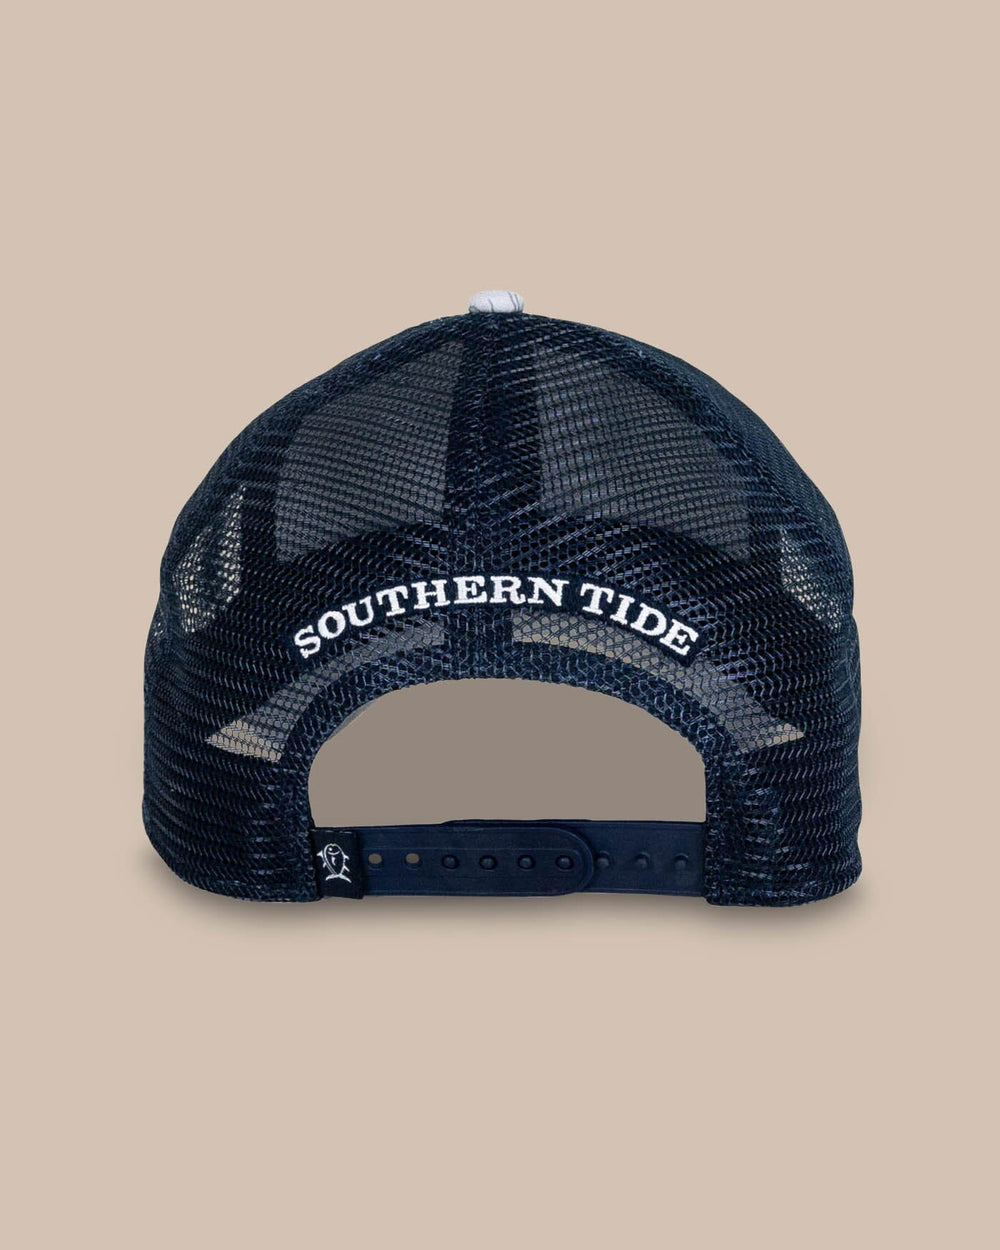 The back view of the Southern Tide Change Your Altitude Print Performance Trucker by Southern Tide - Seagull Grey